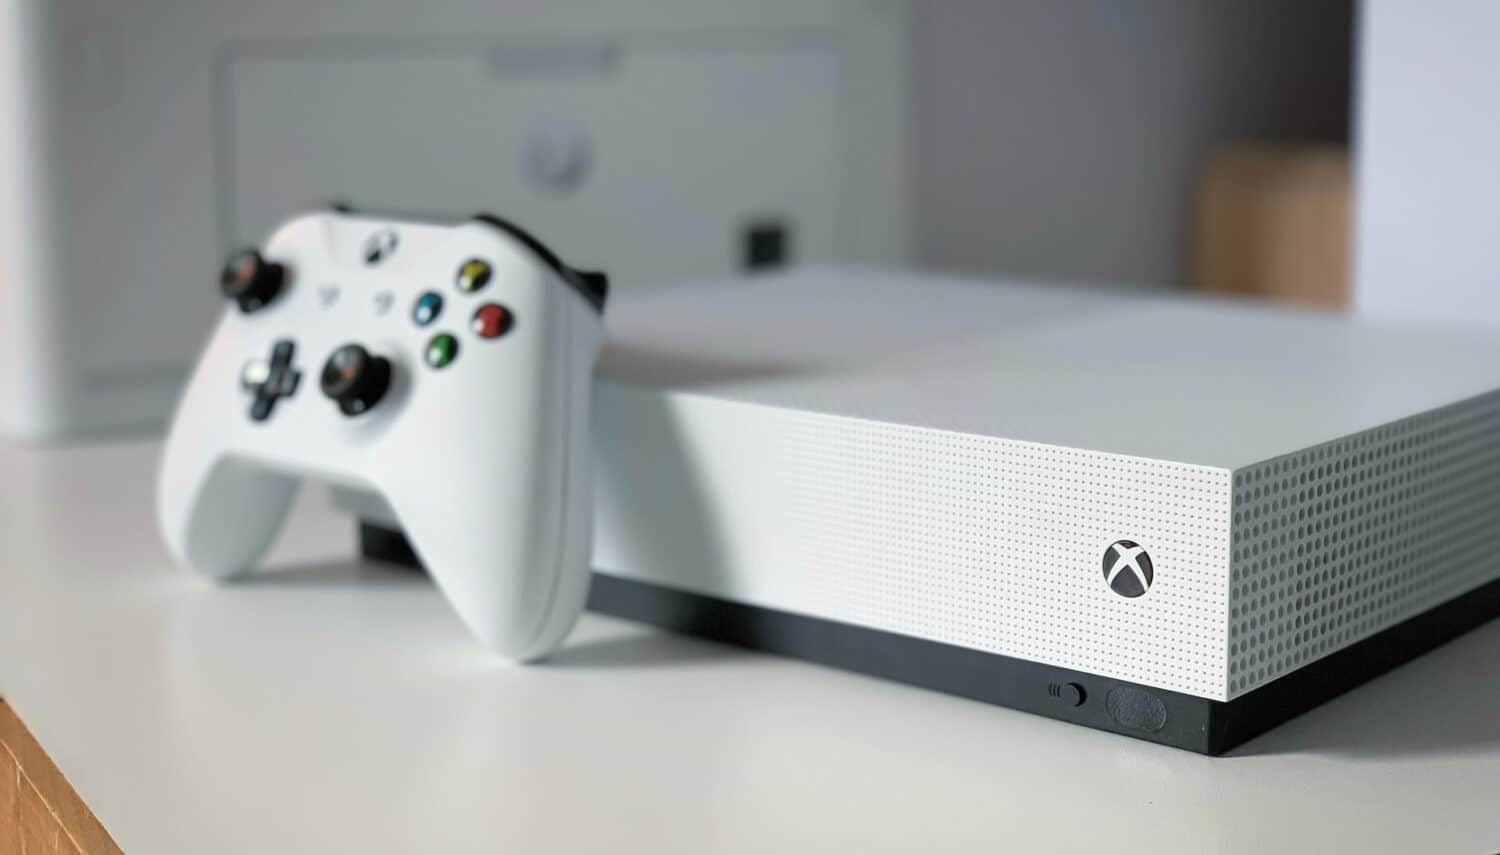 xbox-one-cloud-gaming-jouer-jeux-xbox-series